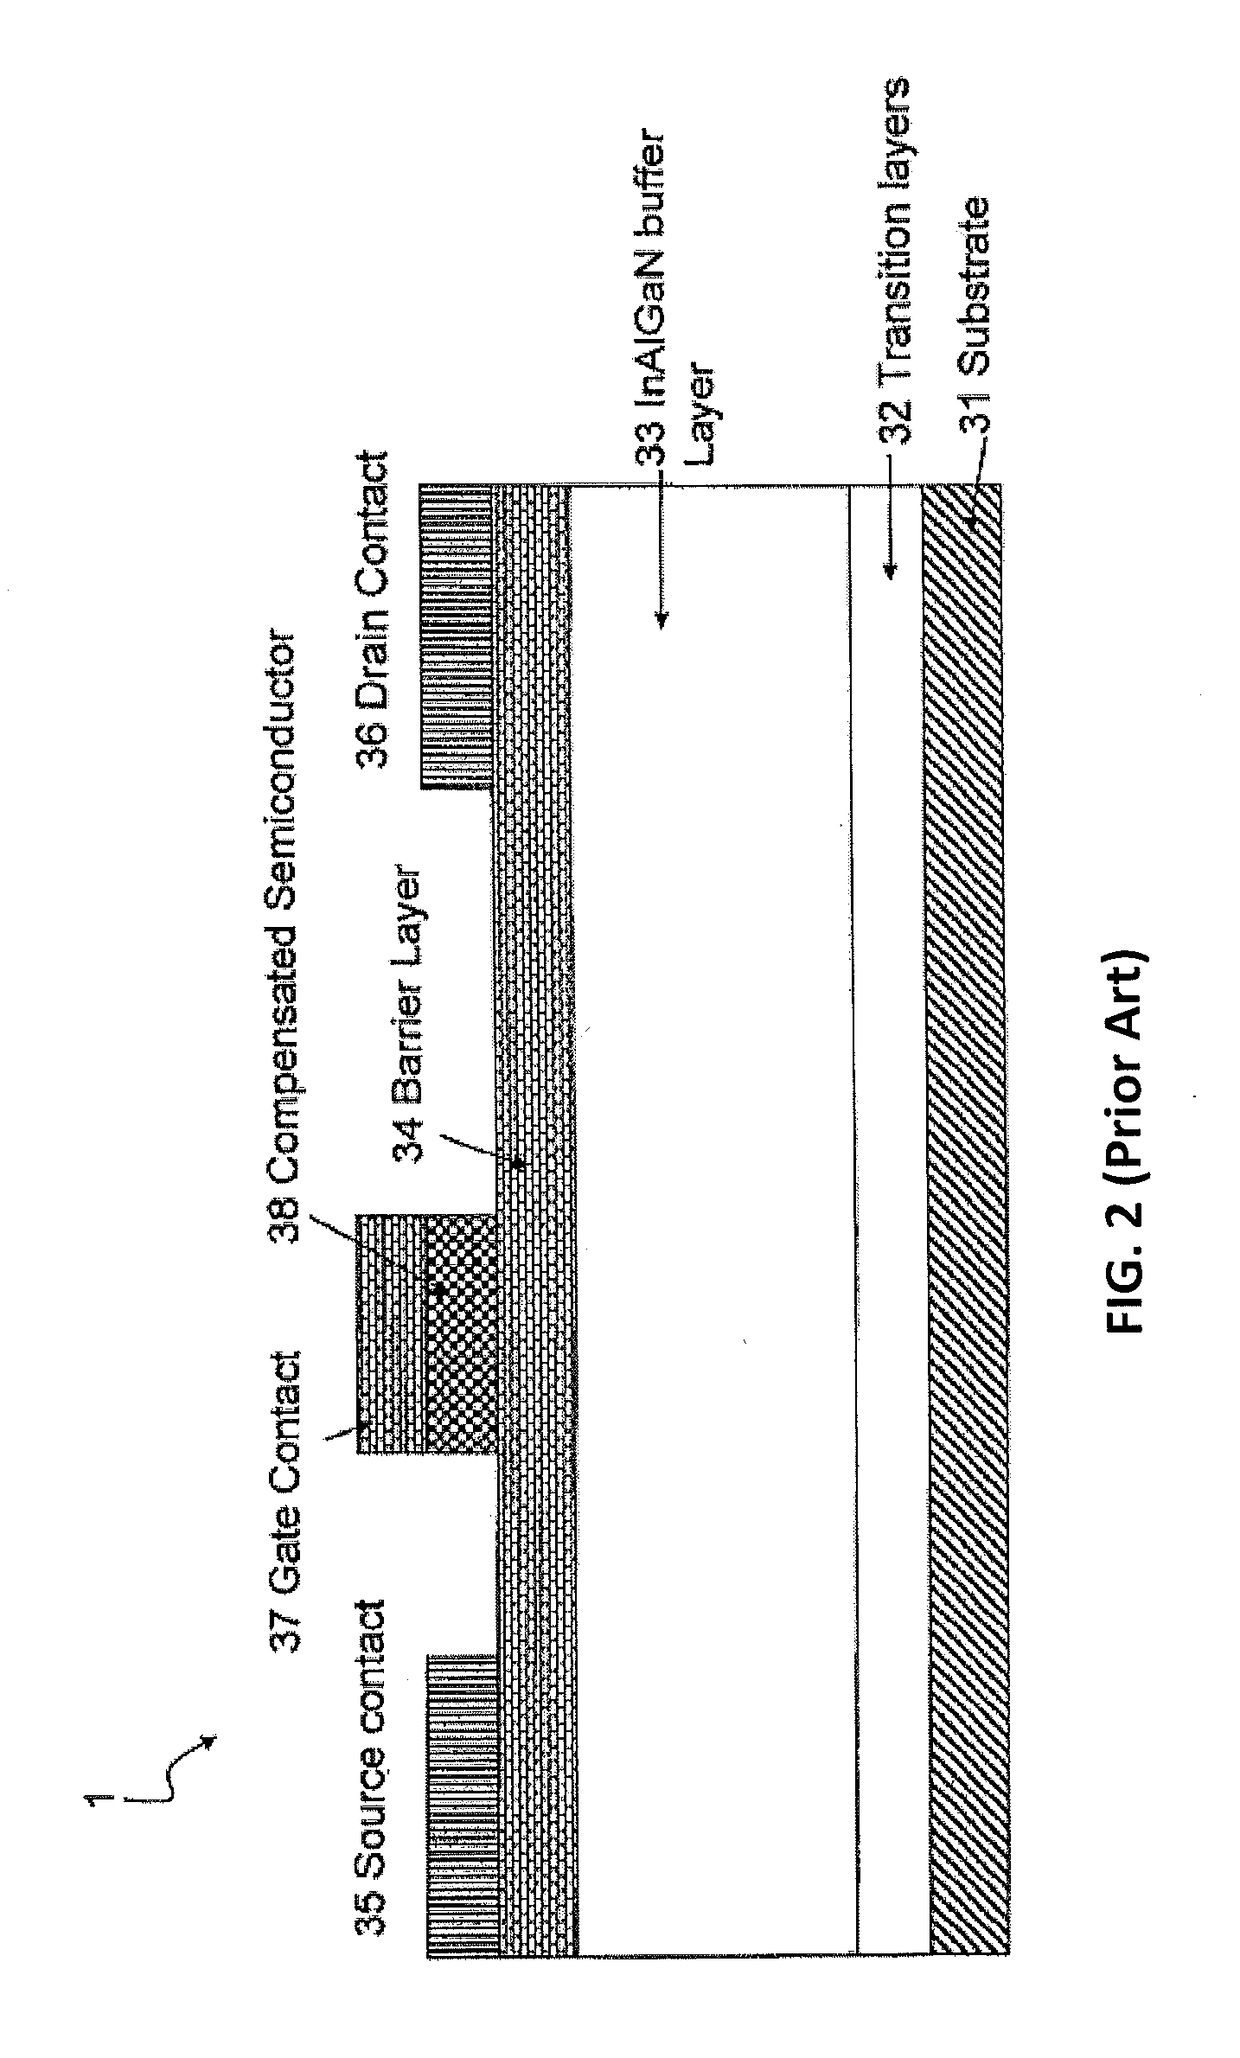 Multi-step surface passivation structures and methods for fabricating same